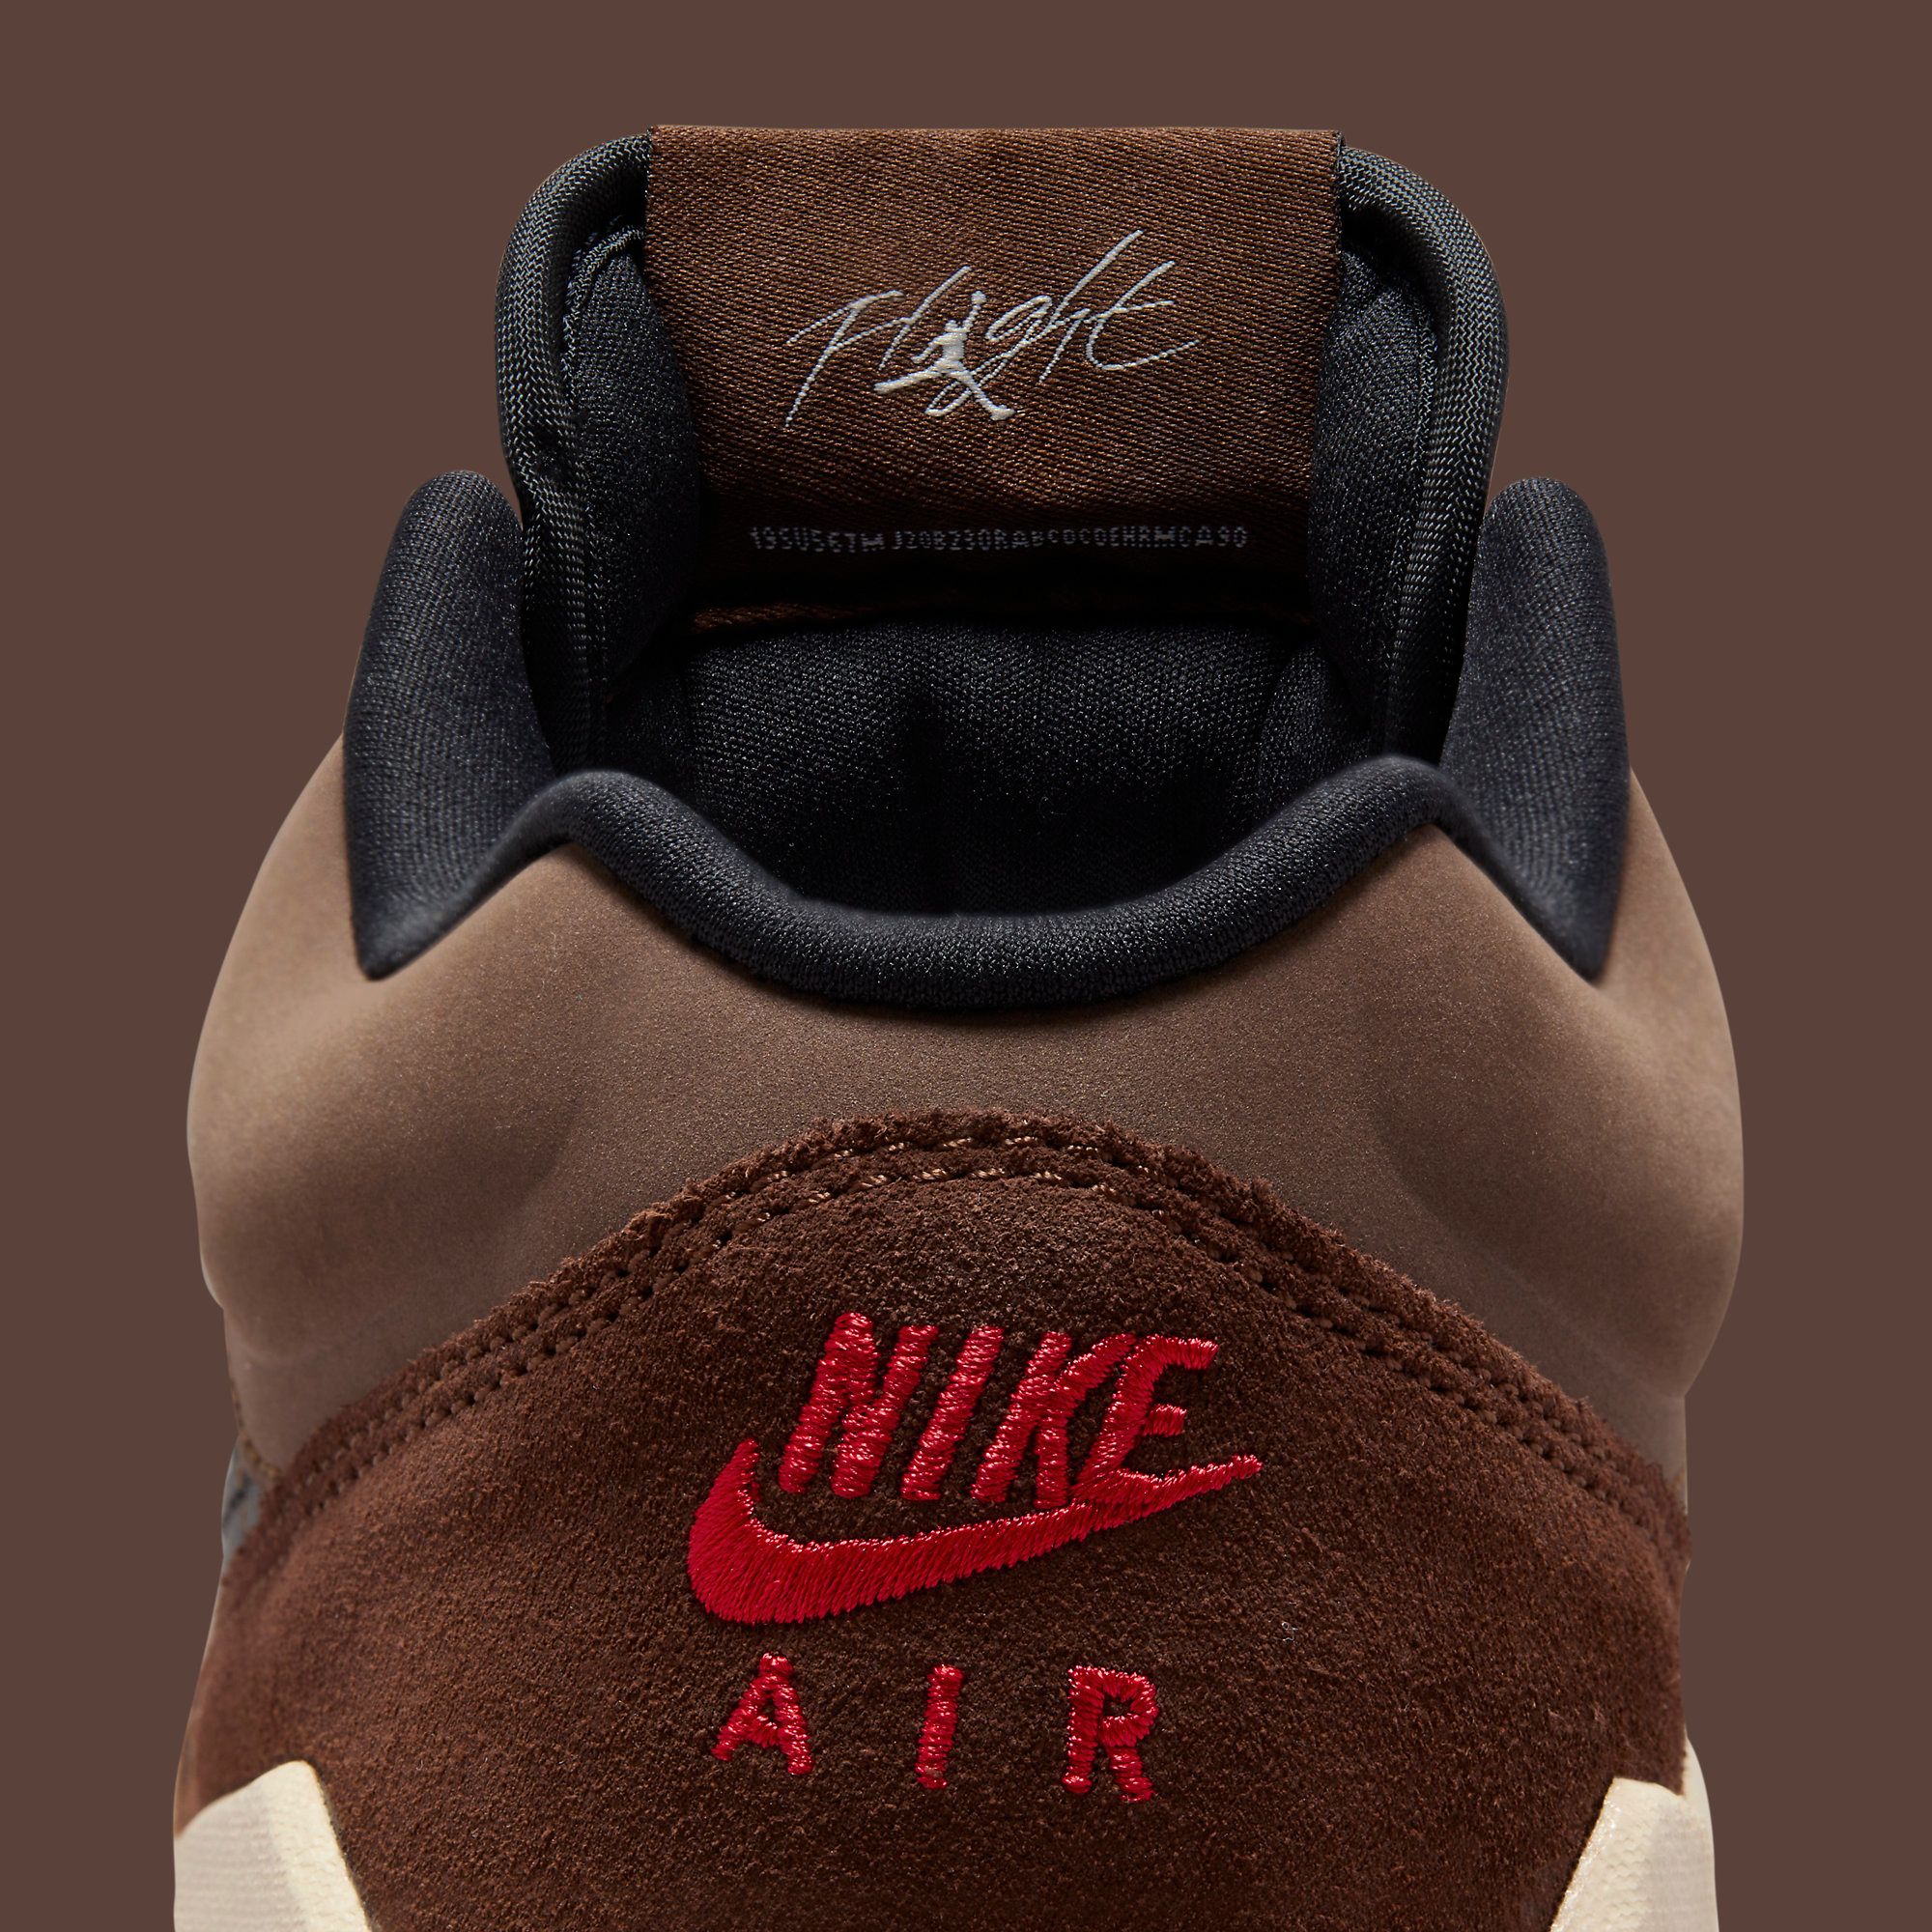 GmarShops Marketplace - Nike Air Jordan limited-edition Stadium 90 (Cacao  Wow/ Brown/ Cacao Wow/ Black/ University Red/ Sanddrift) Men US 8